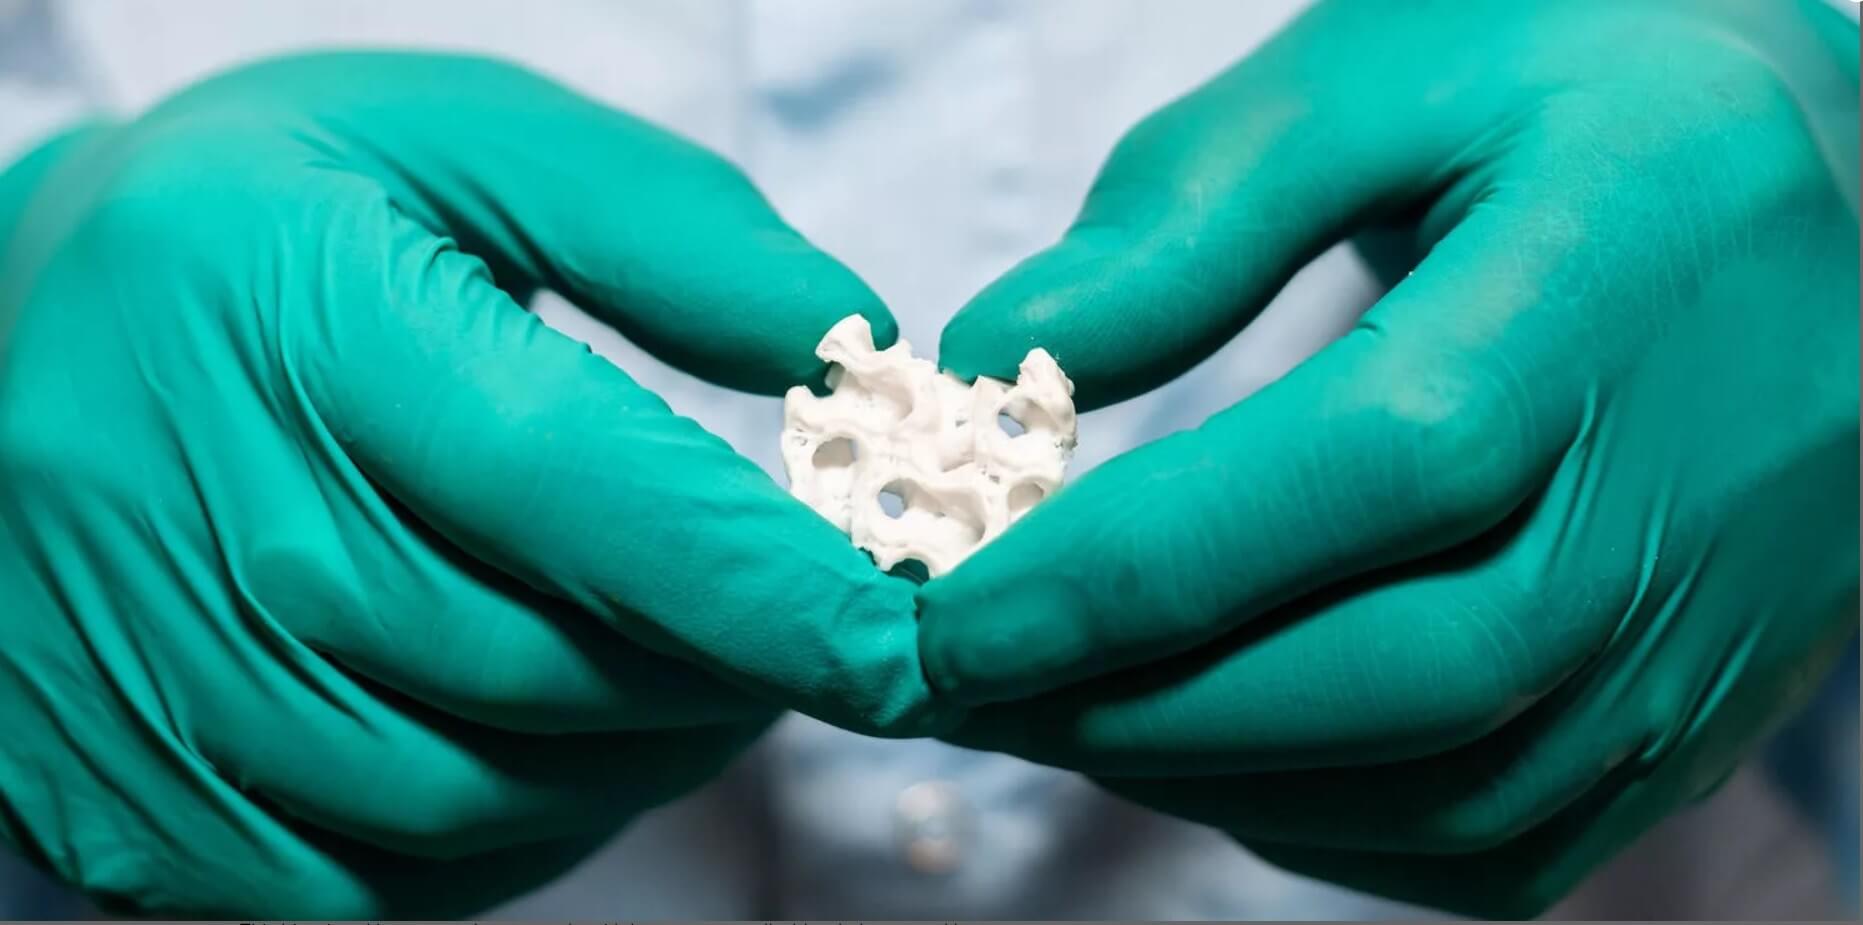 3D-printed skin and bones could help heal Mars astronauts